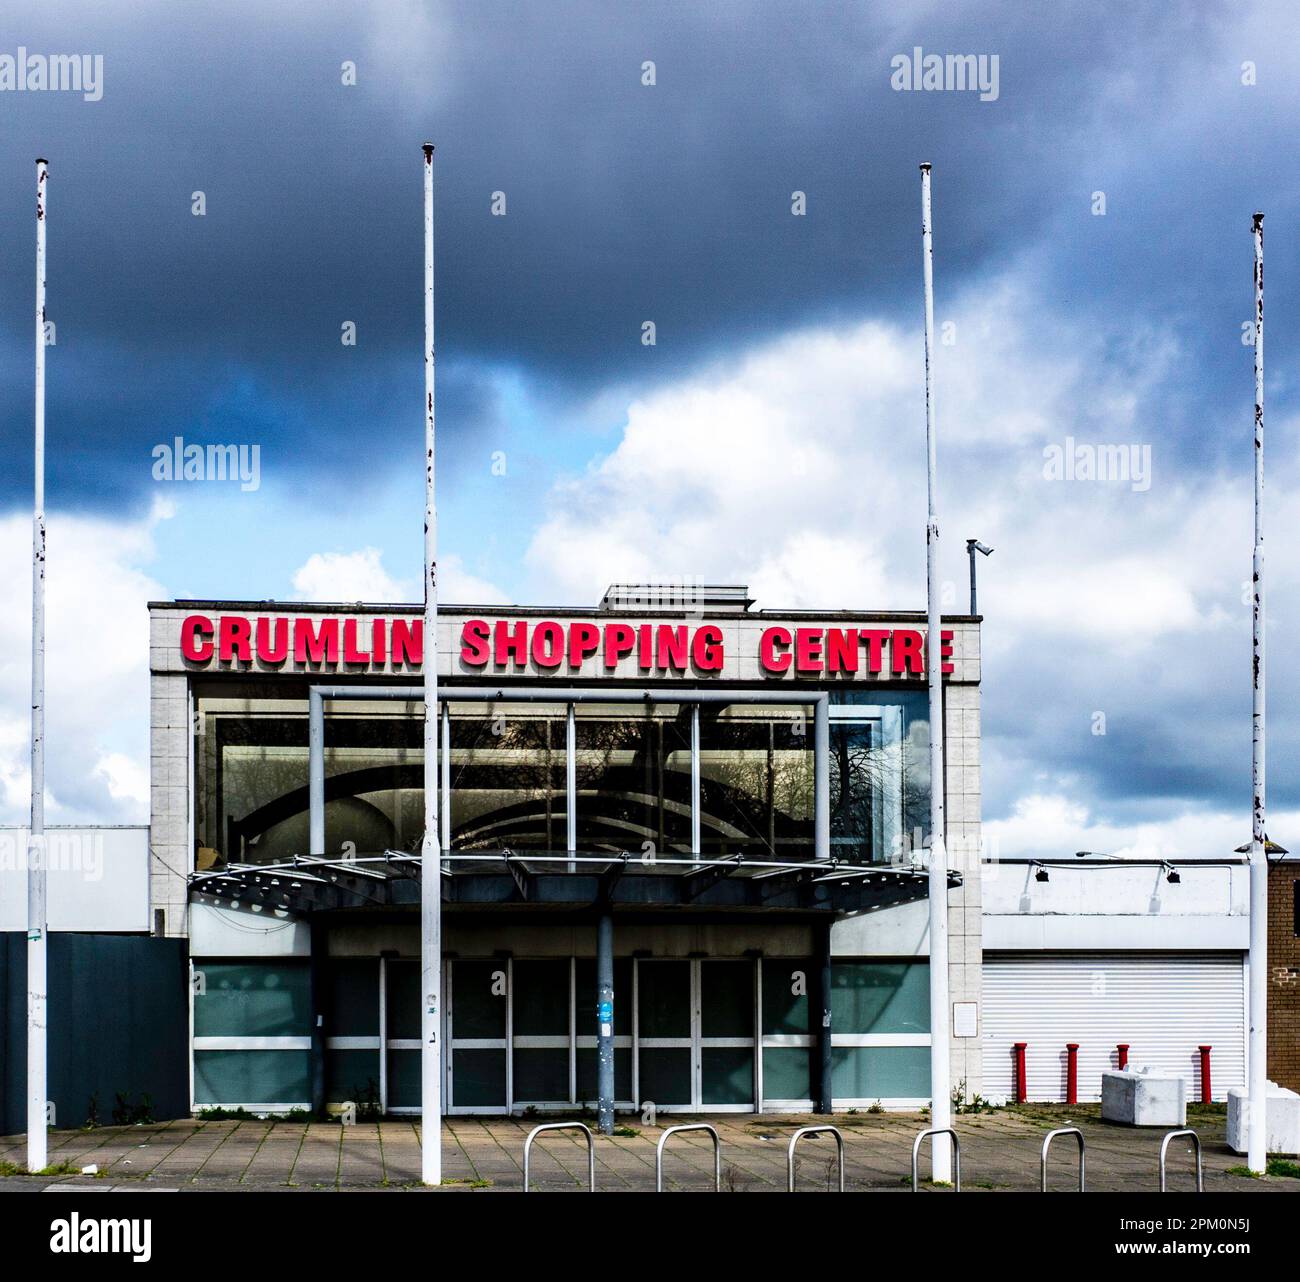 The entrance to Crumlin Shopping Centre, Crumlin Road, Dublin. Once a thriving centre now looking derelict, Dunnes stores are owner/occupiers. Stock Photo